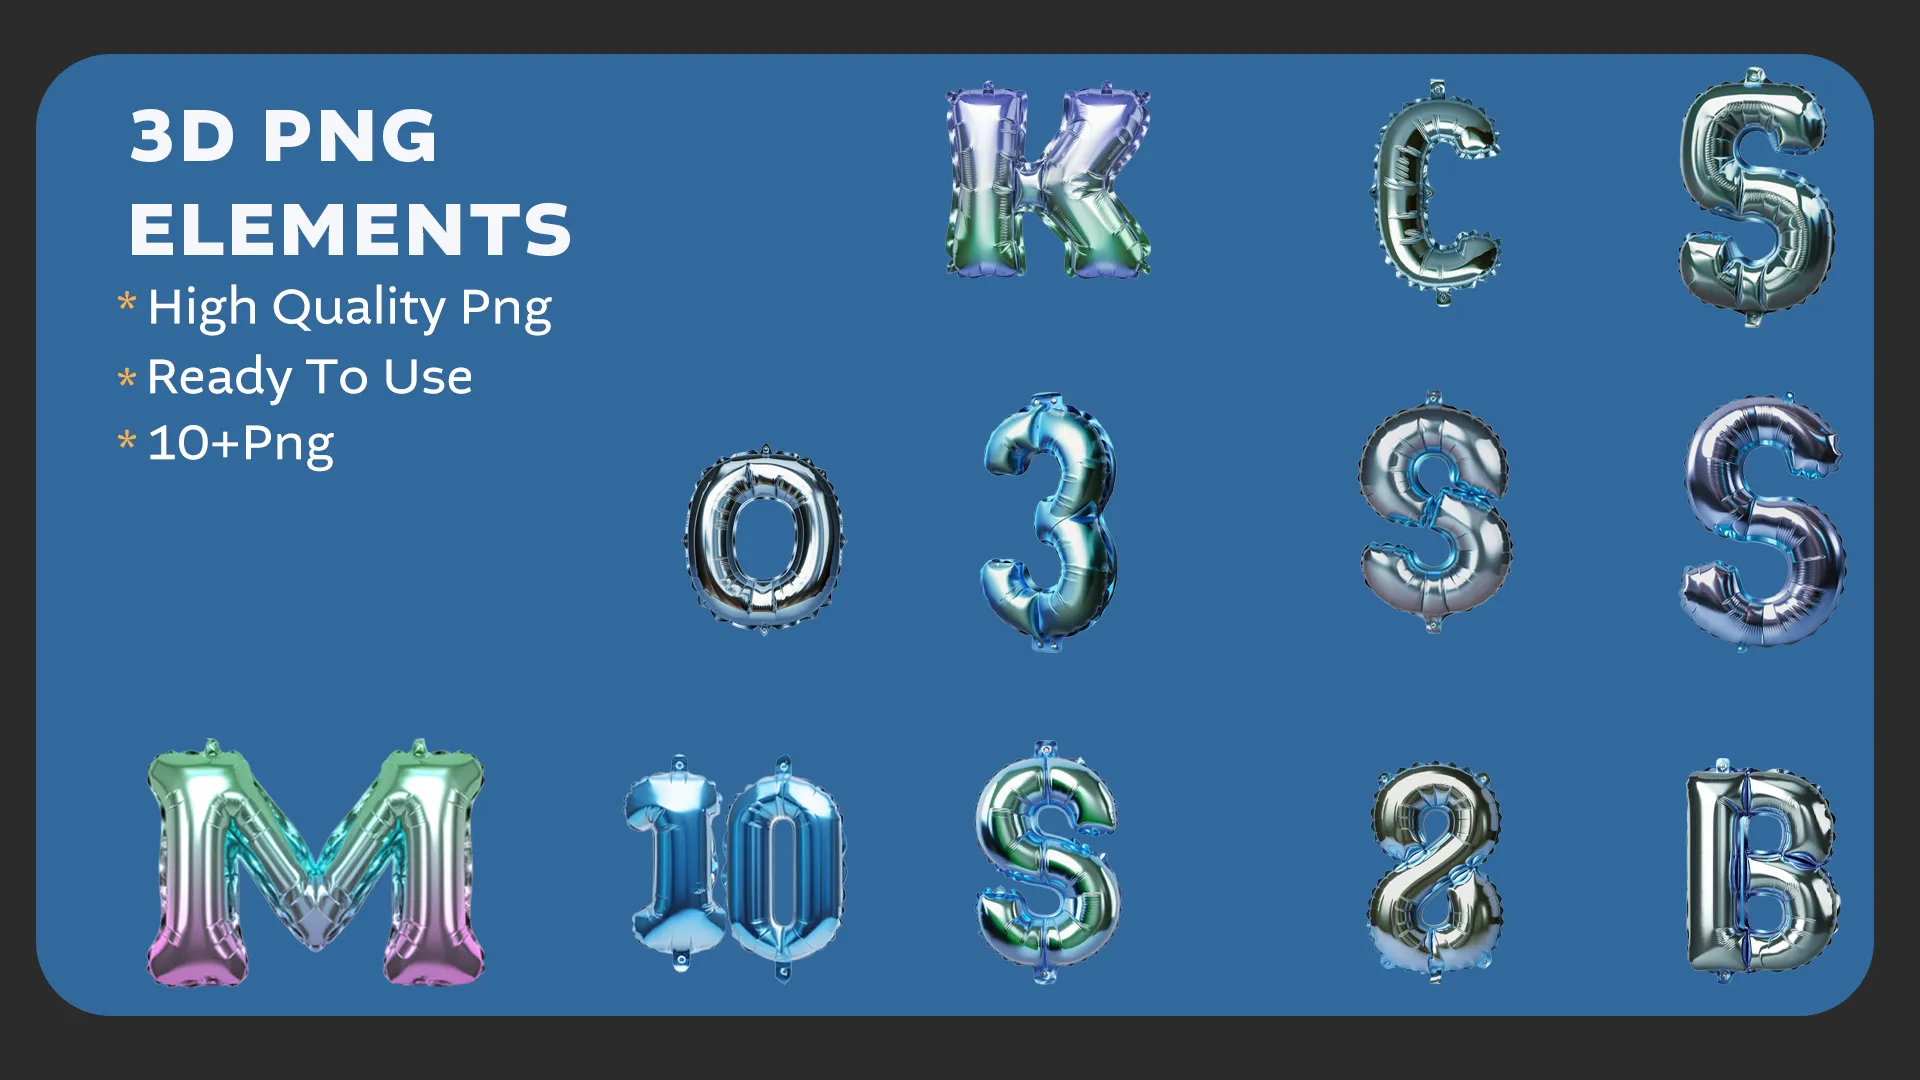 Alphabetic Balloons 3D Pack for Creative Designs